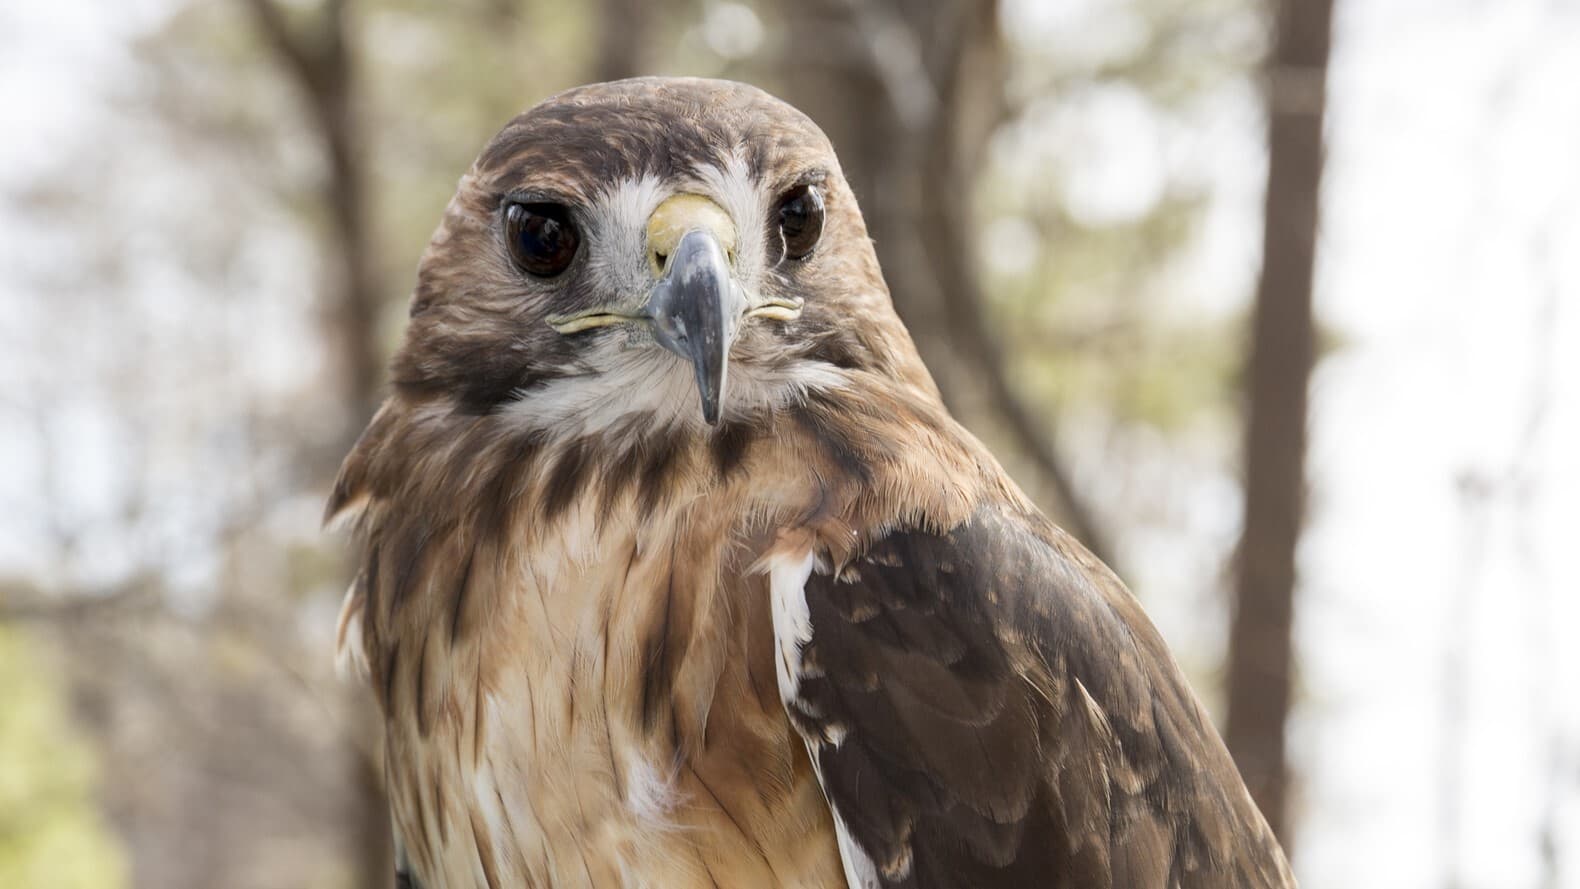 A red tailed hawk looks towards the camera as it rests